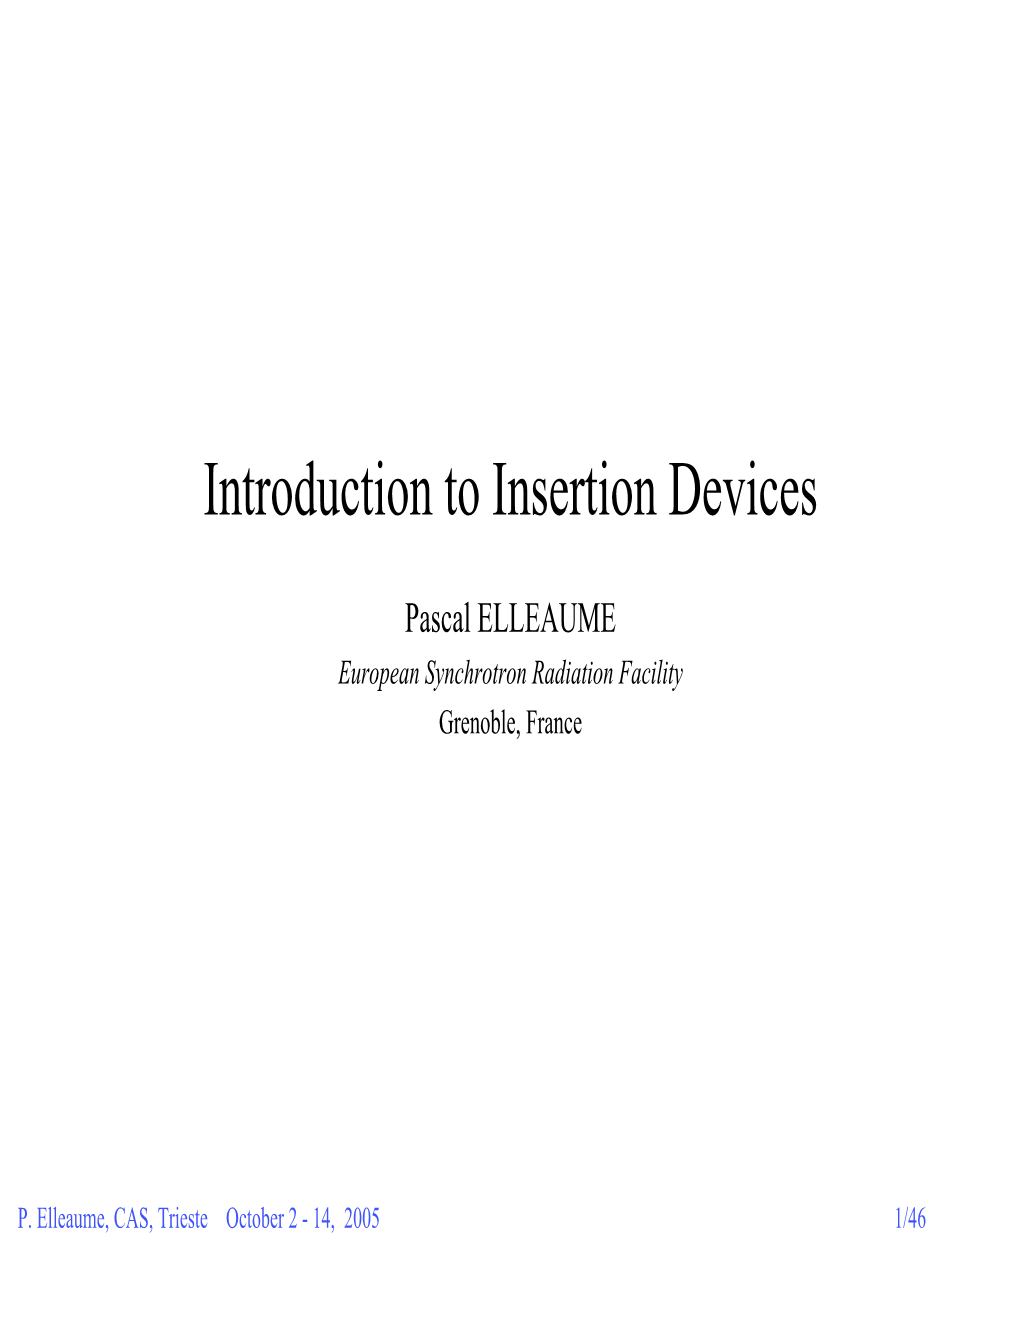 Introduction to Insertion Devices